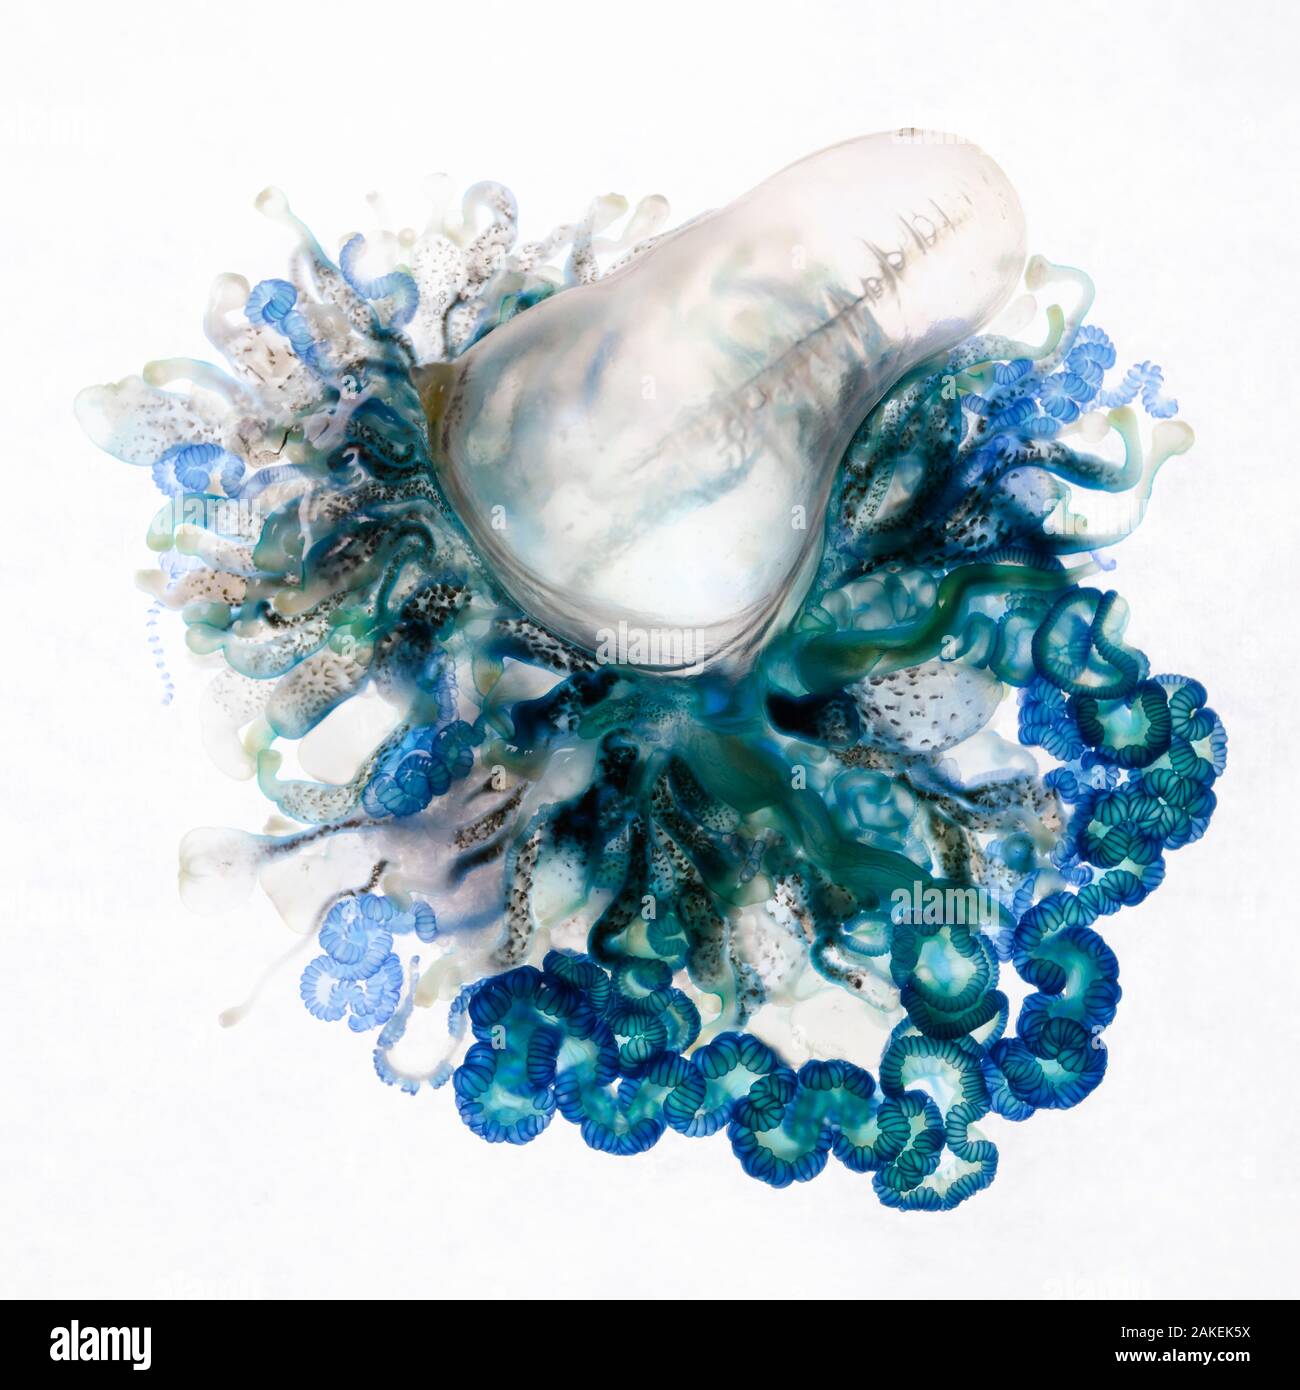 Top-down view of an Indo-Pacific Portuguese Man-of-War (Physalia utriculus). This is one of many thousands that were part of a mass stranding in South Africa. Atlantic ocean. Stock Photo